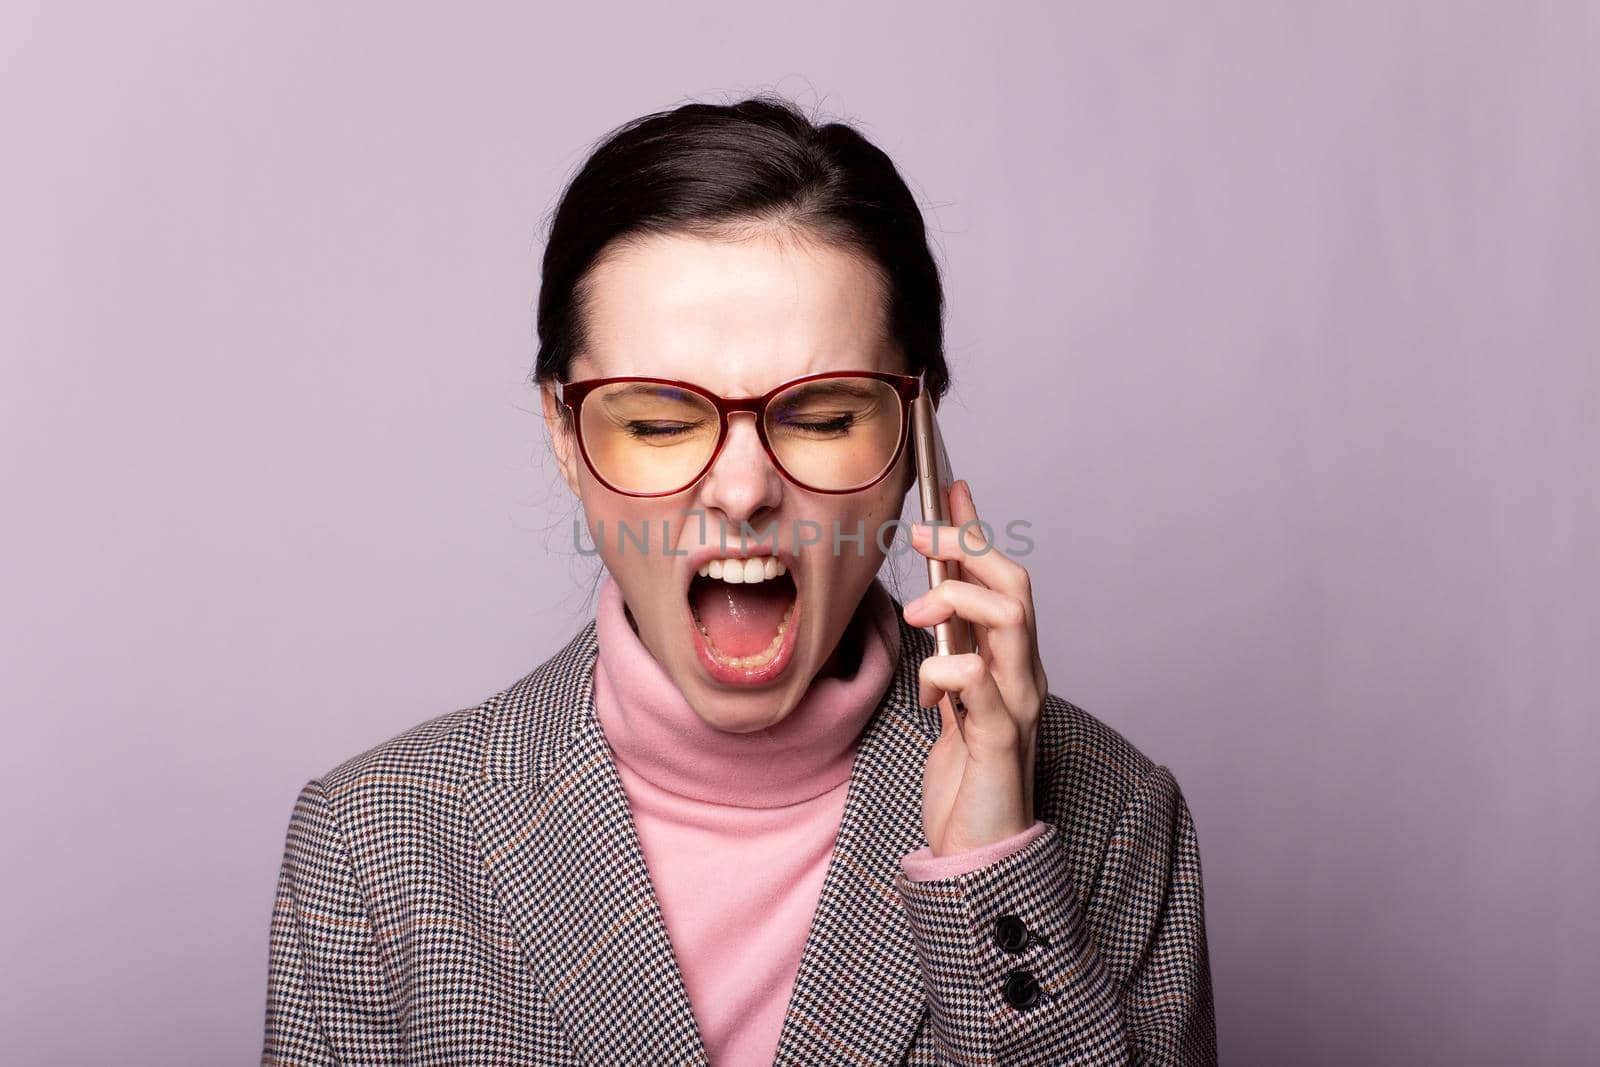 woman in a pink turtleneck, gray jacket, glasses for sight communicates on the phone on a gray background. High quality photo